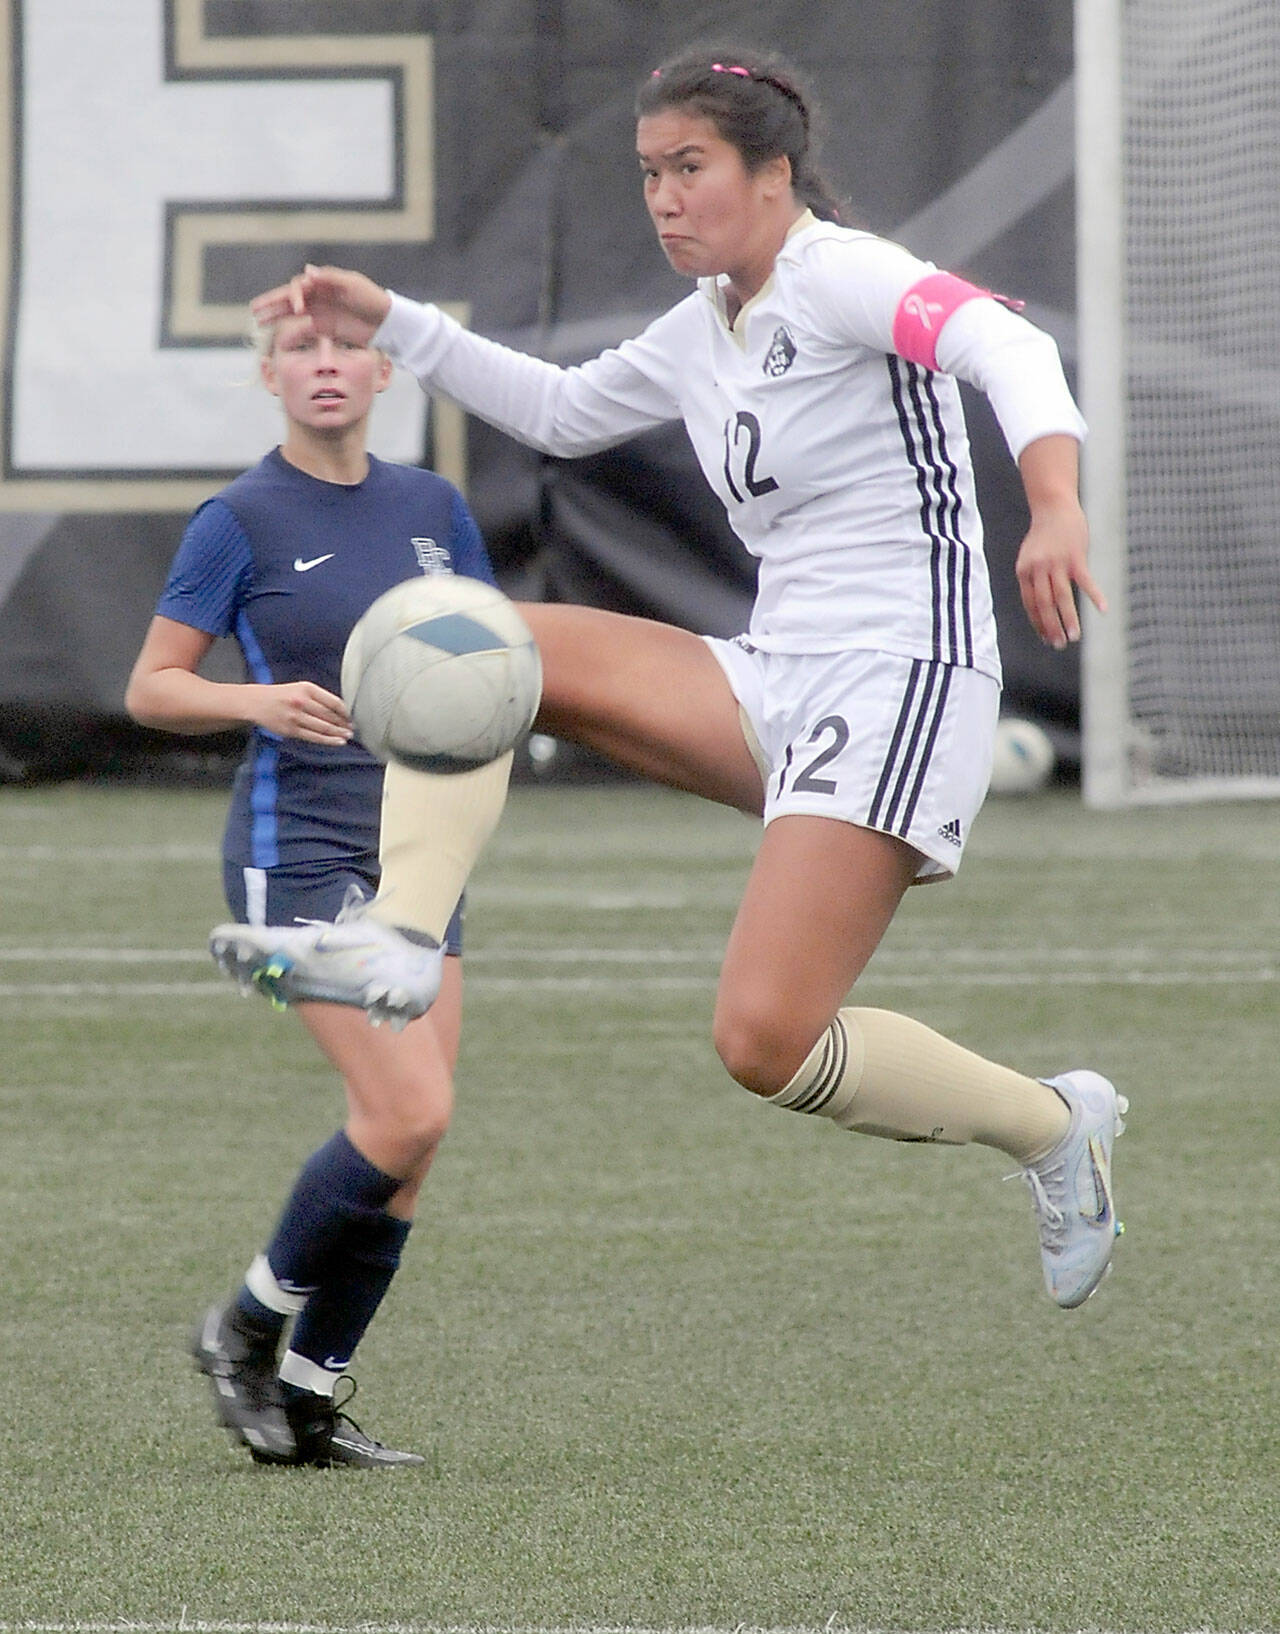 KEITH THORPE/PENINSULA DAILY NEWS Peninsula’s Keilee Silva steps high for the ball as Bellevue’s Daisy Morris look on during Wednesday’s match in Port Angeles.